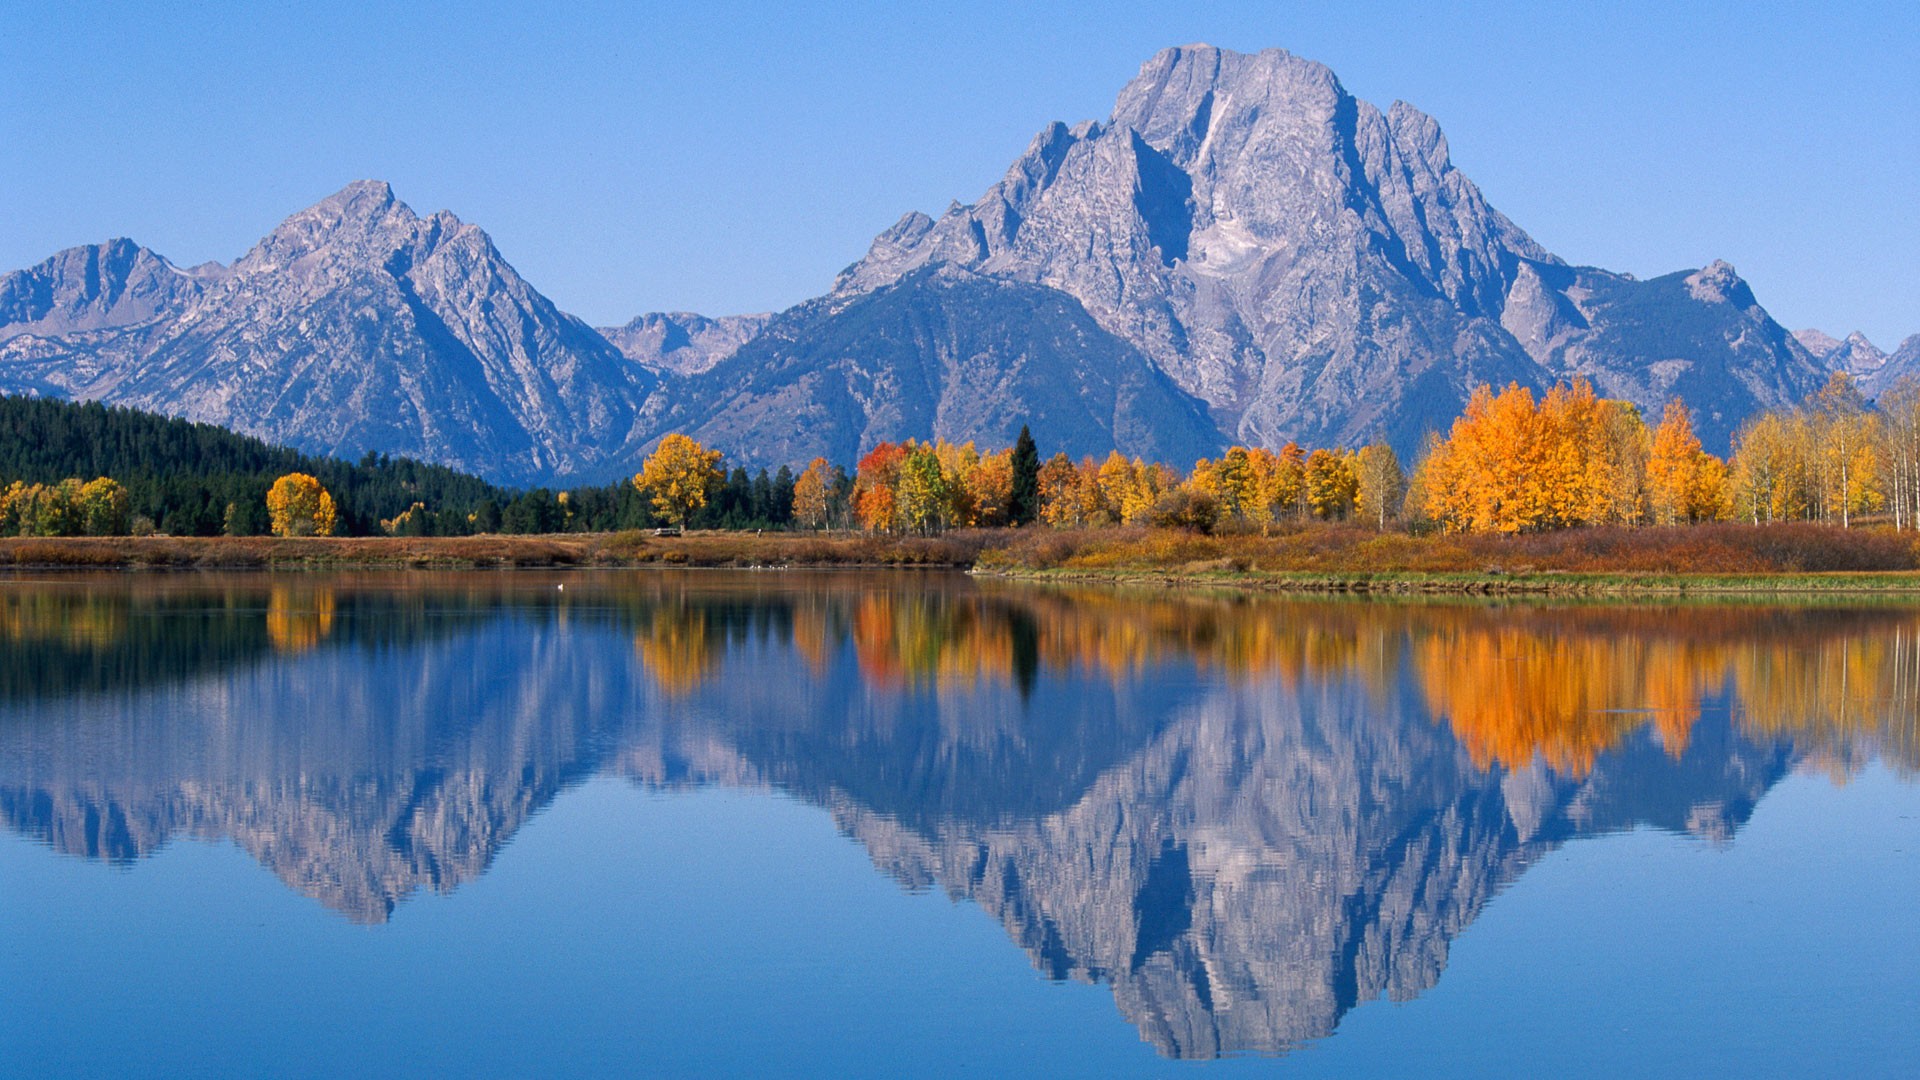 General 1920x1080 landscape fall Grand Teton National Park Wyoming river mountains USA reflection nature